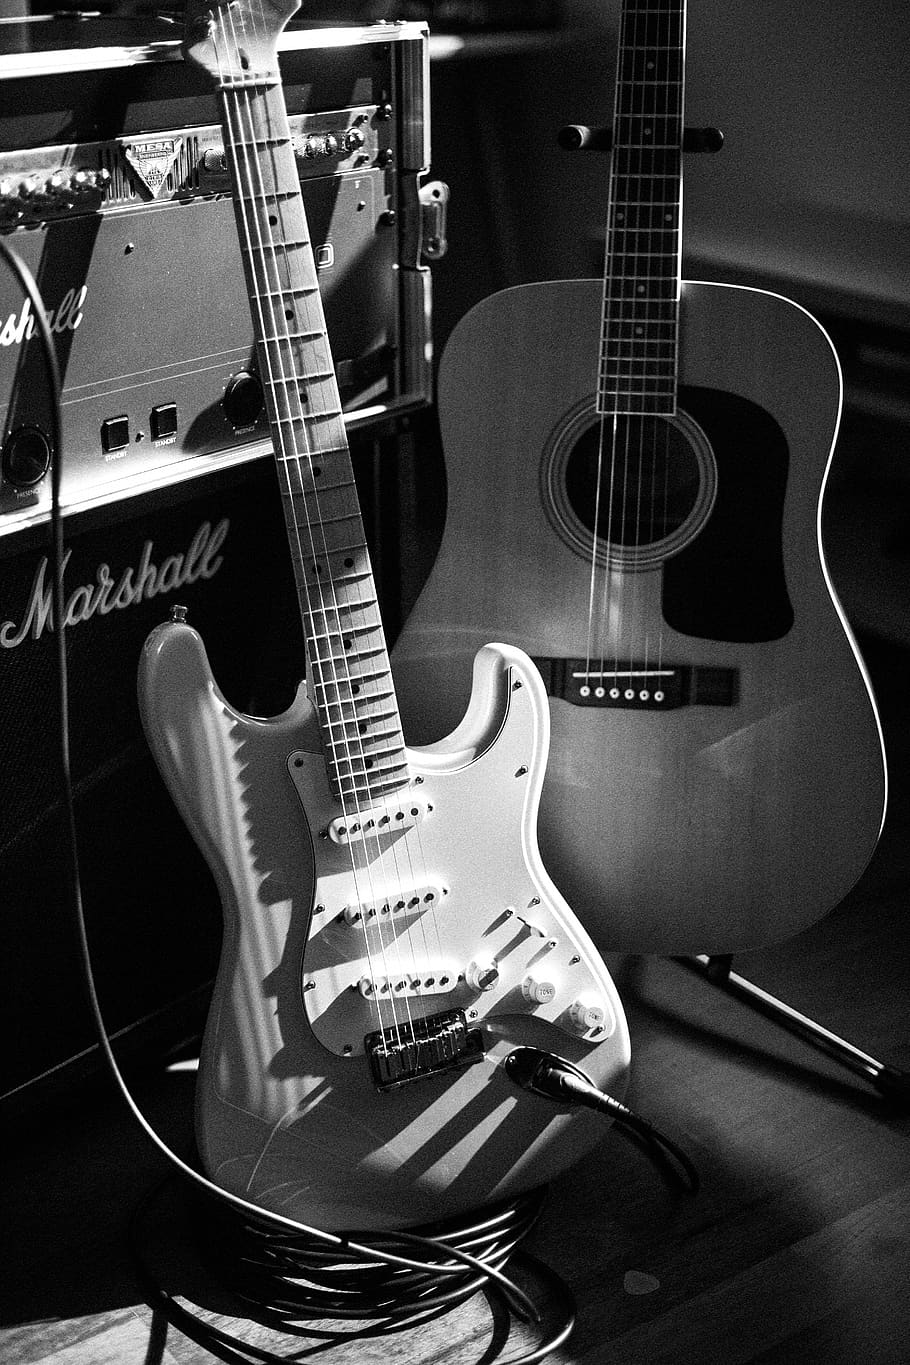 instruments, guitars, electric, accoustic, bandw, black and white